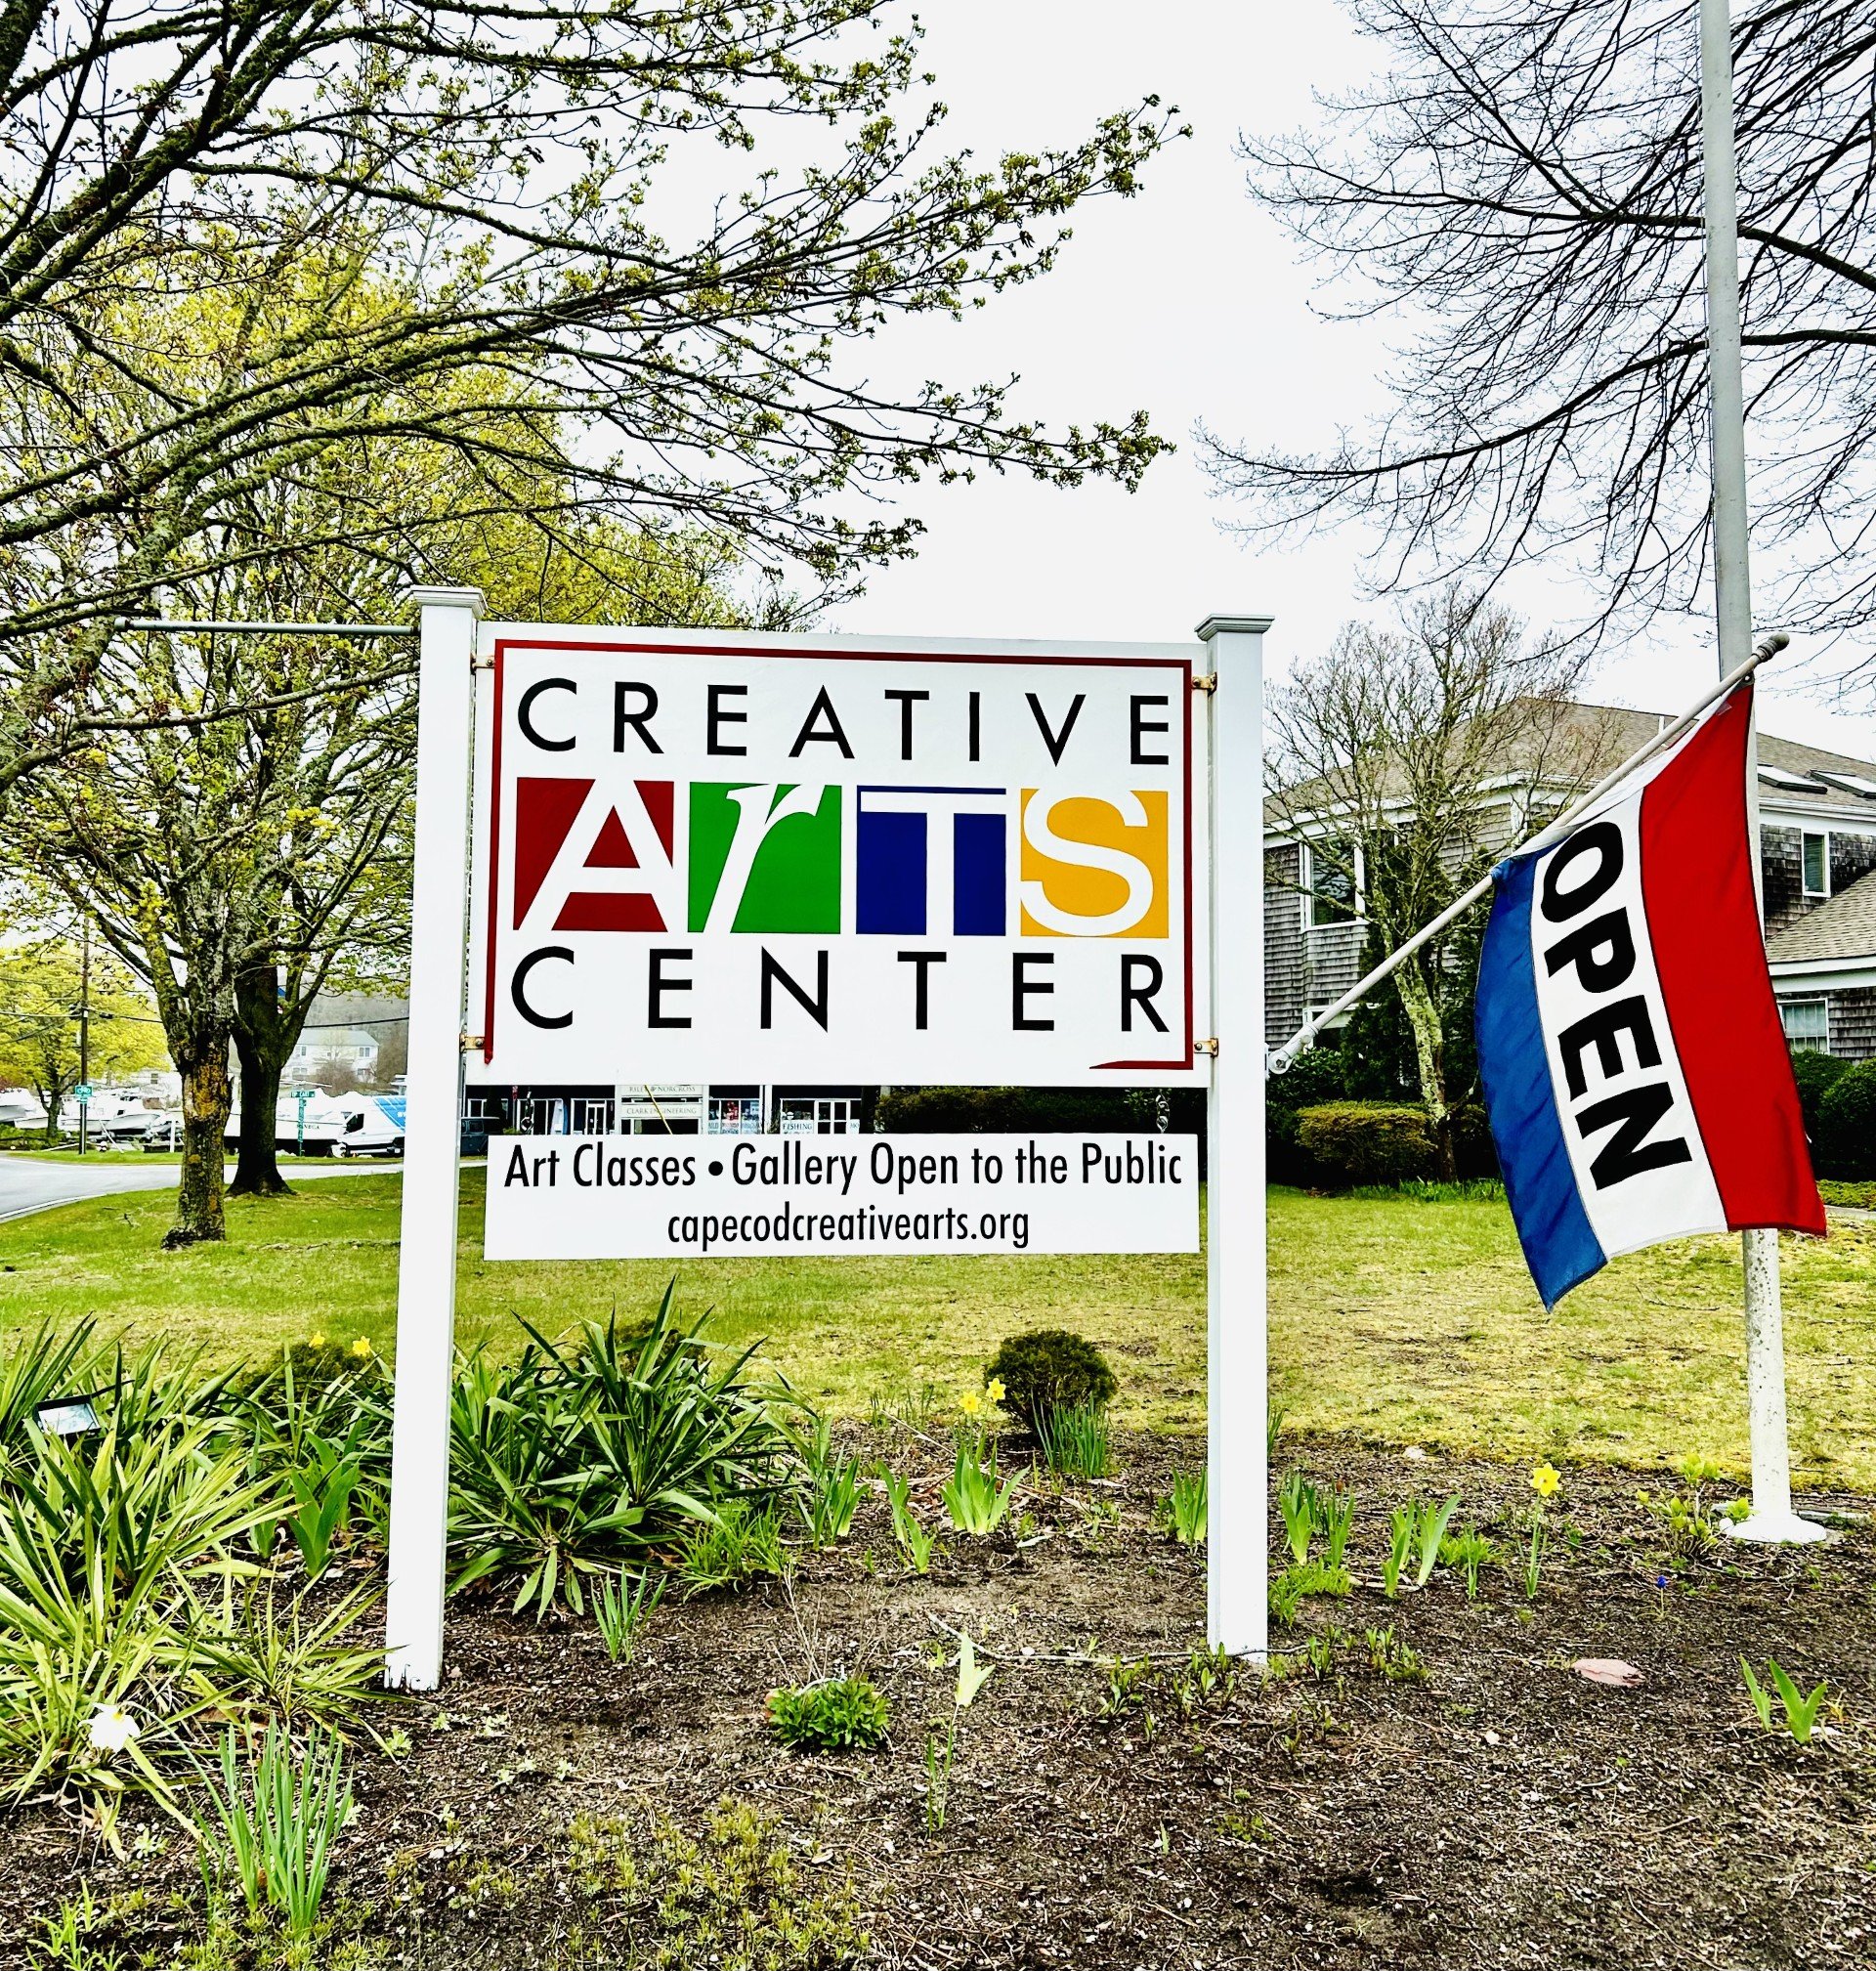 🎨 Exciting News Alert! 🌟 Our Creative Arts Center sign just got a fabulous facelift, and we can't wait to share it with you all! 🎉
🌿 Step outside and behold our sparkling new addition to the outdoor sign! Now, not only does it proudly display our